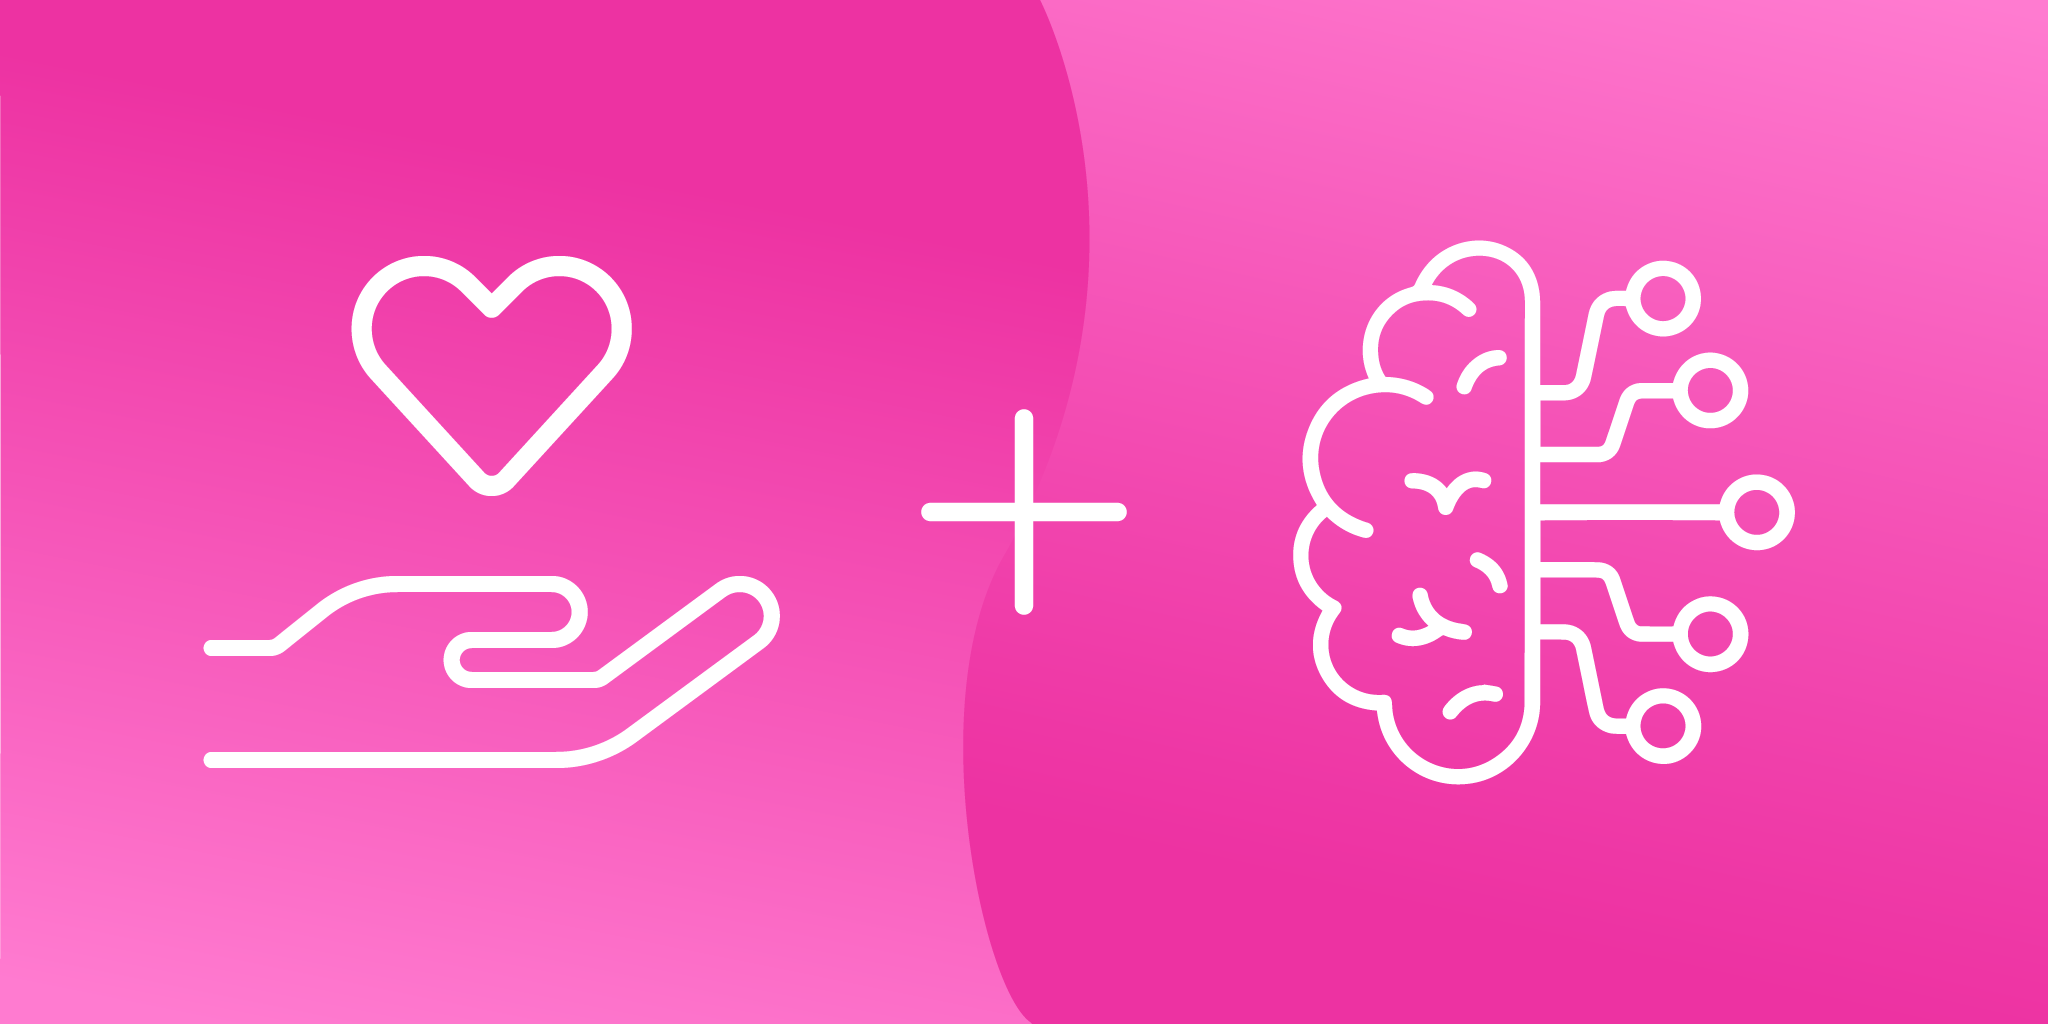 Pink image with caring hand and brain